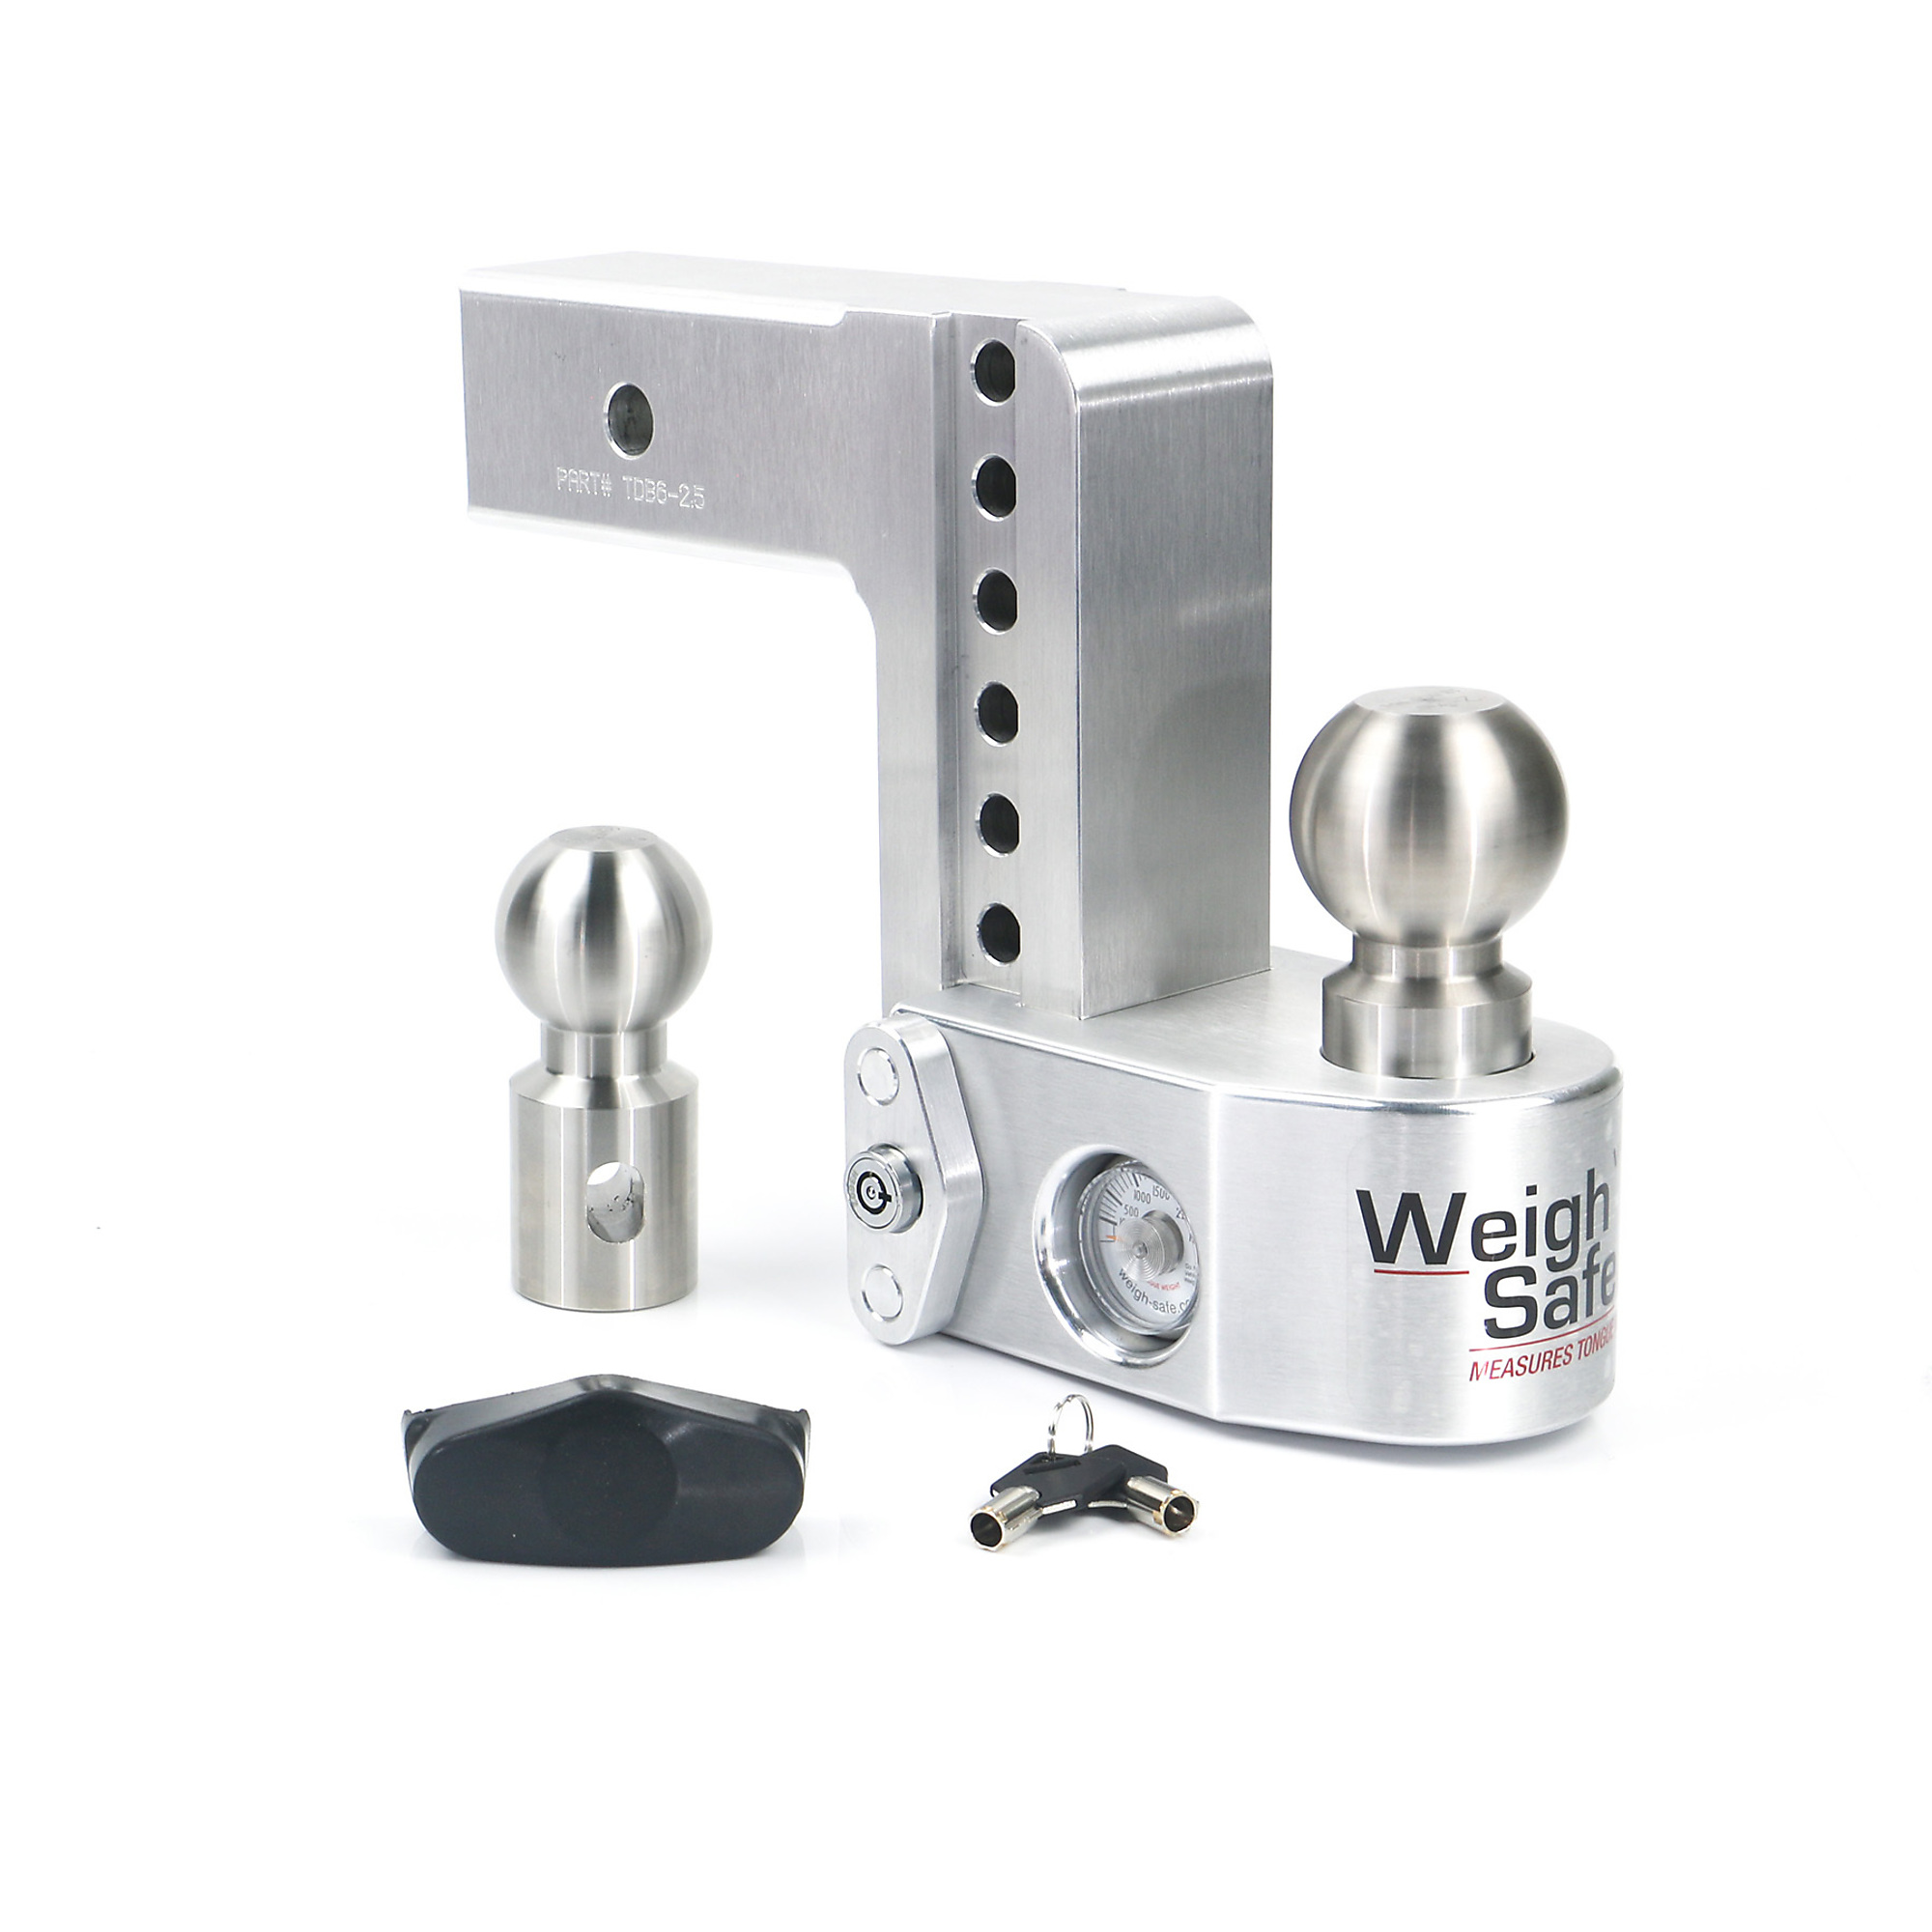 Weigh-Safe, WS 6Inch Drop w/ 2.5Inch Shank (8K/18.5K), Gross Towing Weight 18500 lb, Ball Diameter Multiple in, Class Rating N/A, Model WS6-2.5